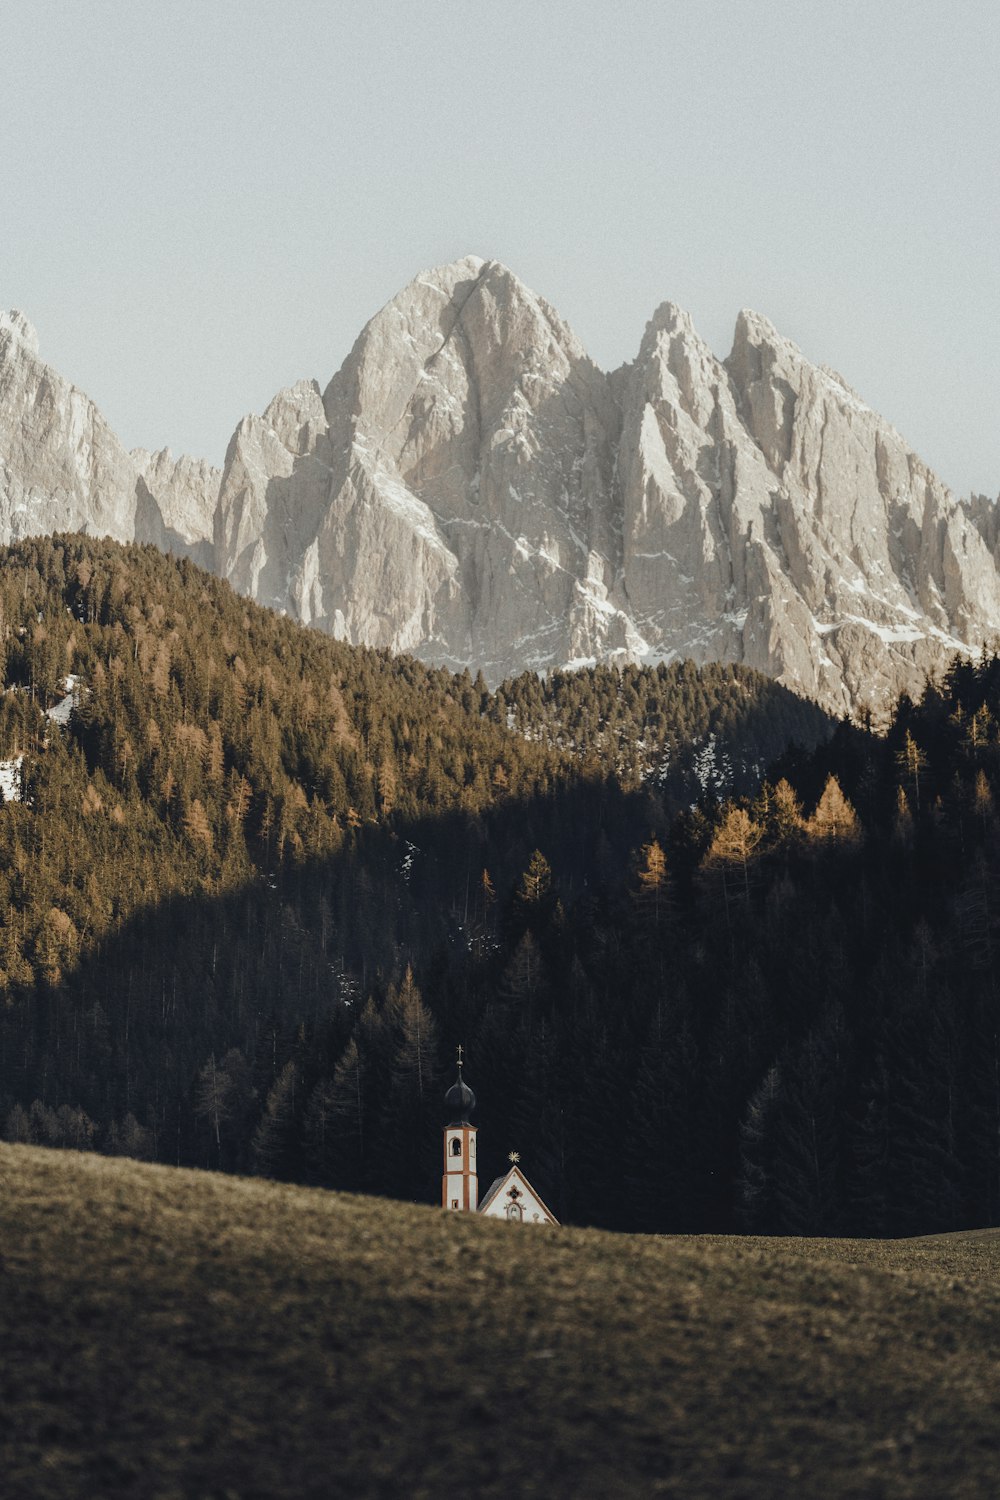 a church in the middle of a field with mountains in the background